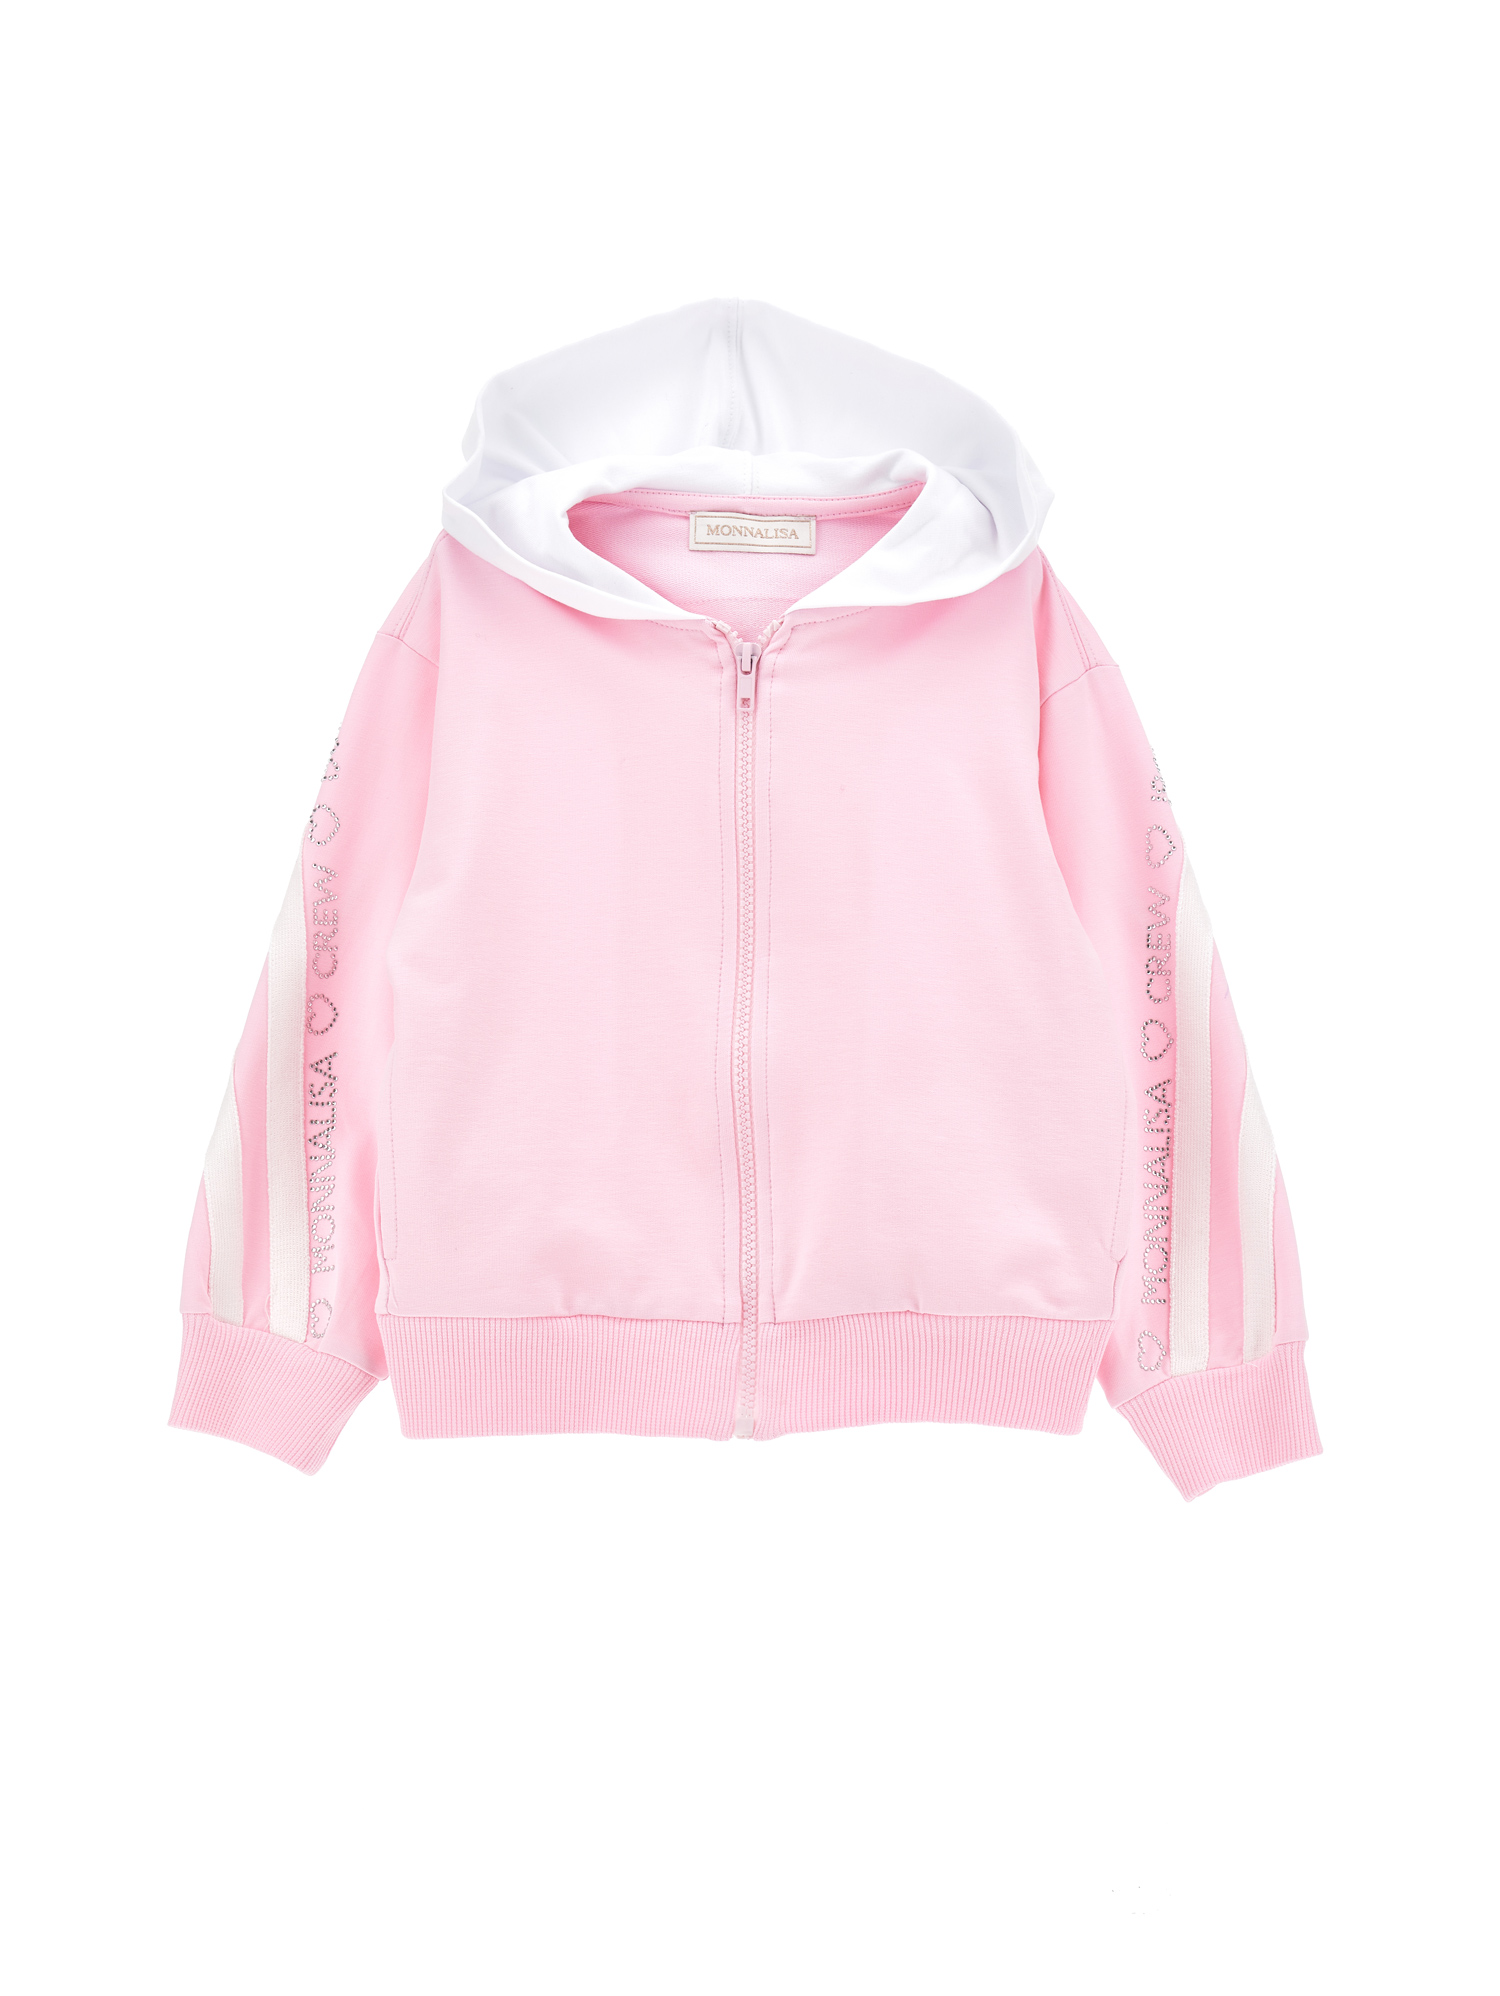 Monnalisa Open Sweatshirt With Blouse Sleeves In Pink + White